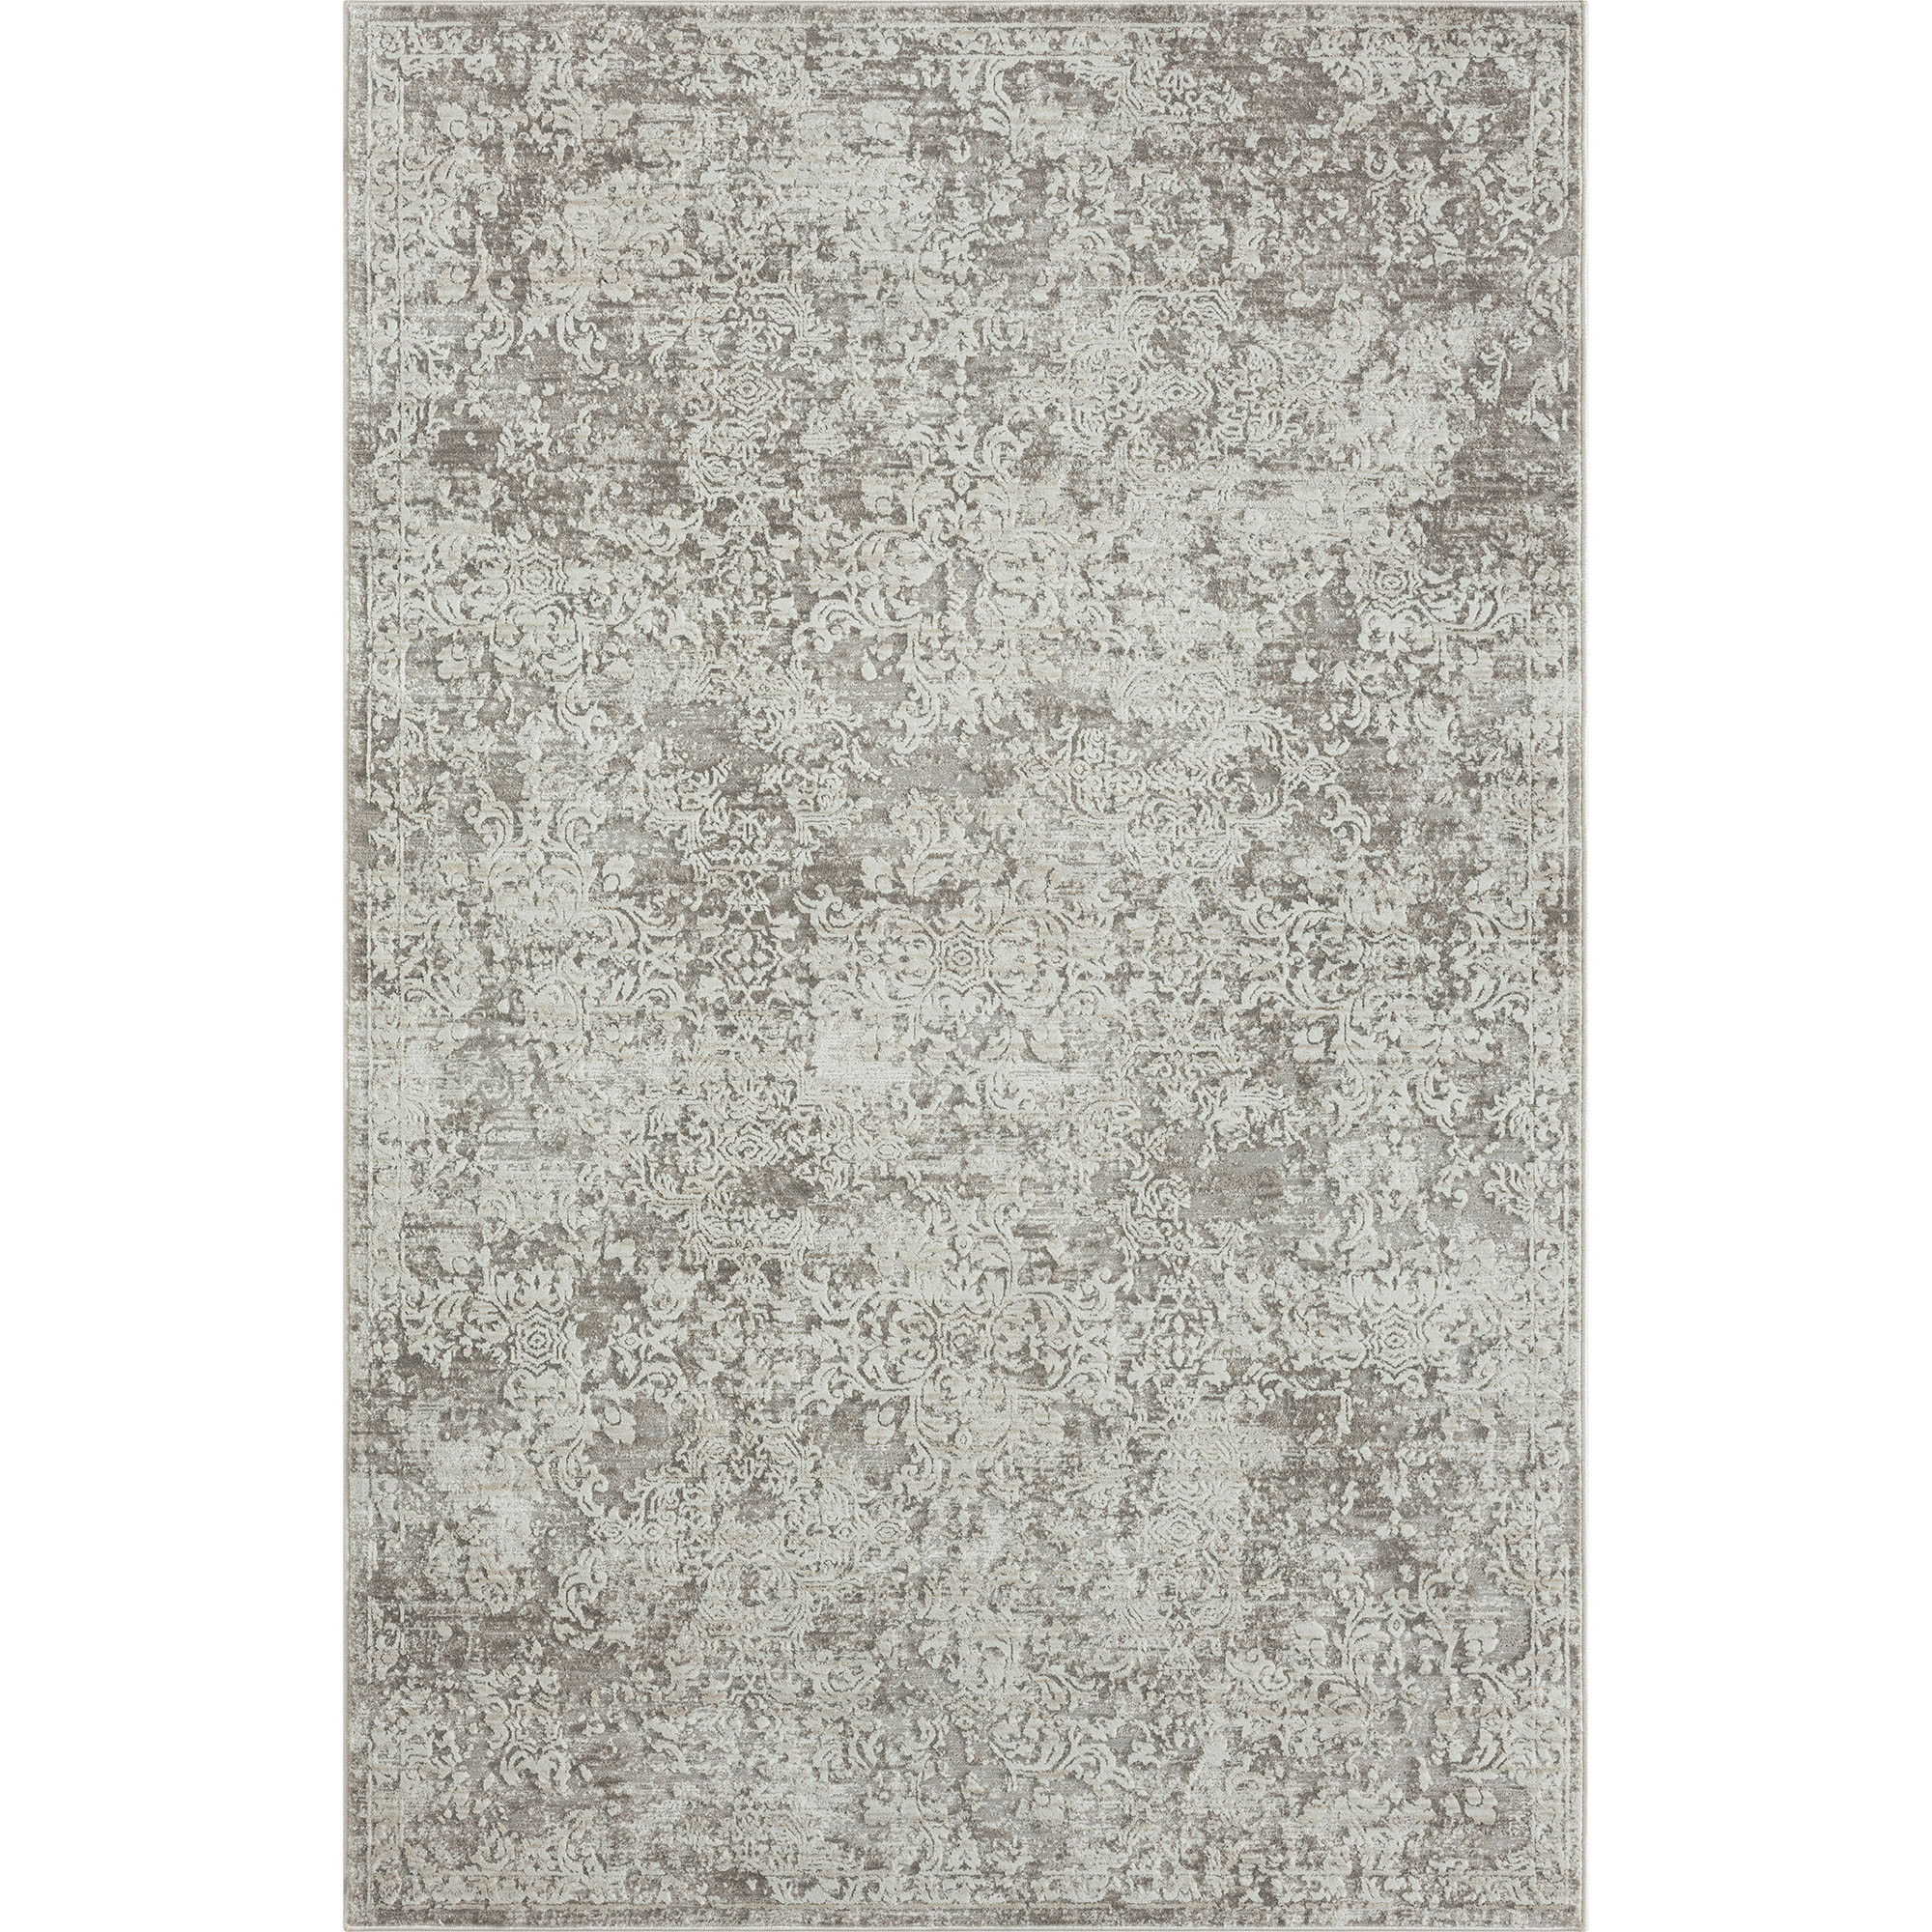 4' X 6' Gray Abstract Distressed Area Rug-515834-1